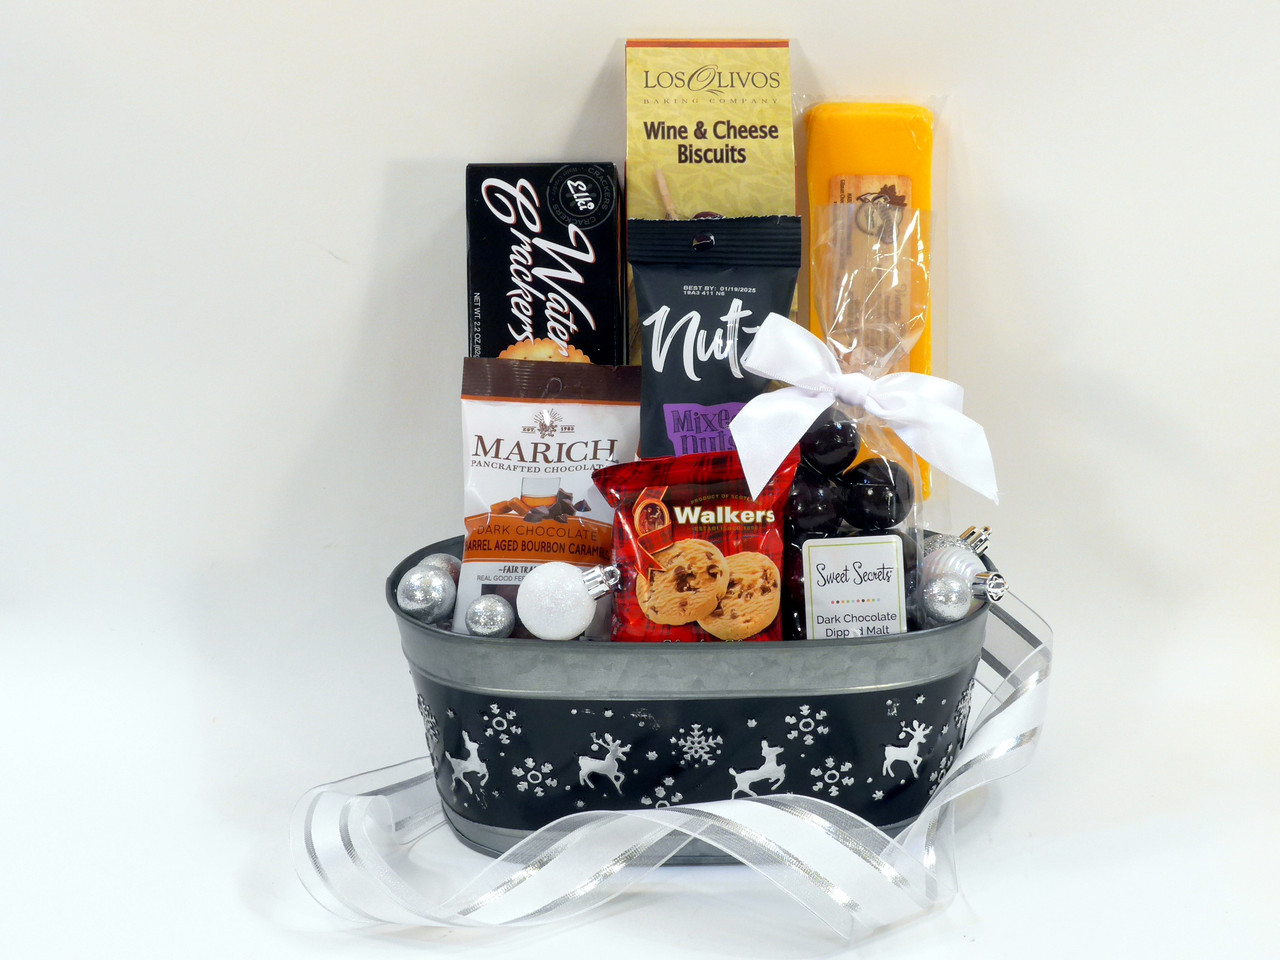 Christmas corporate chocolate gifts